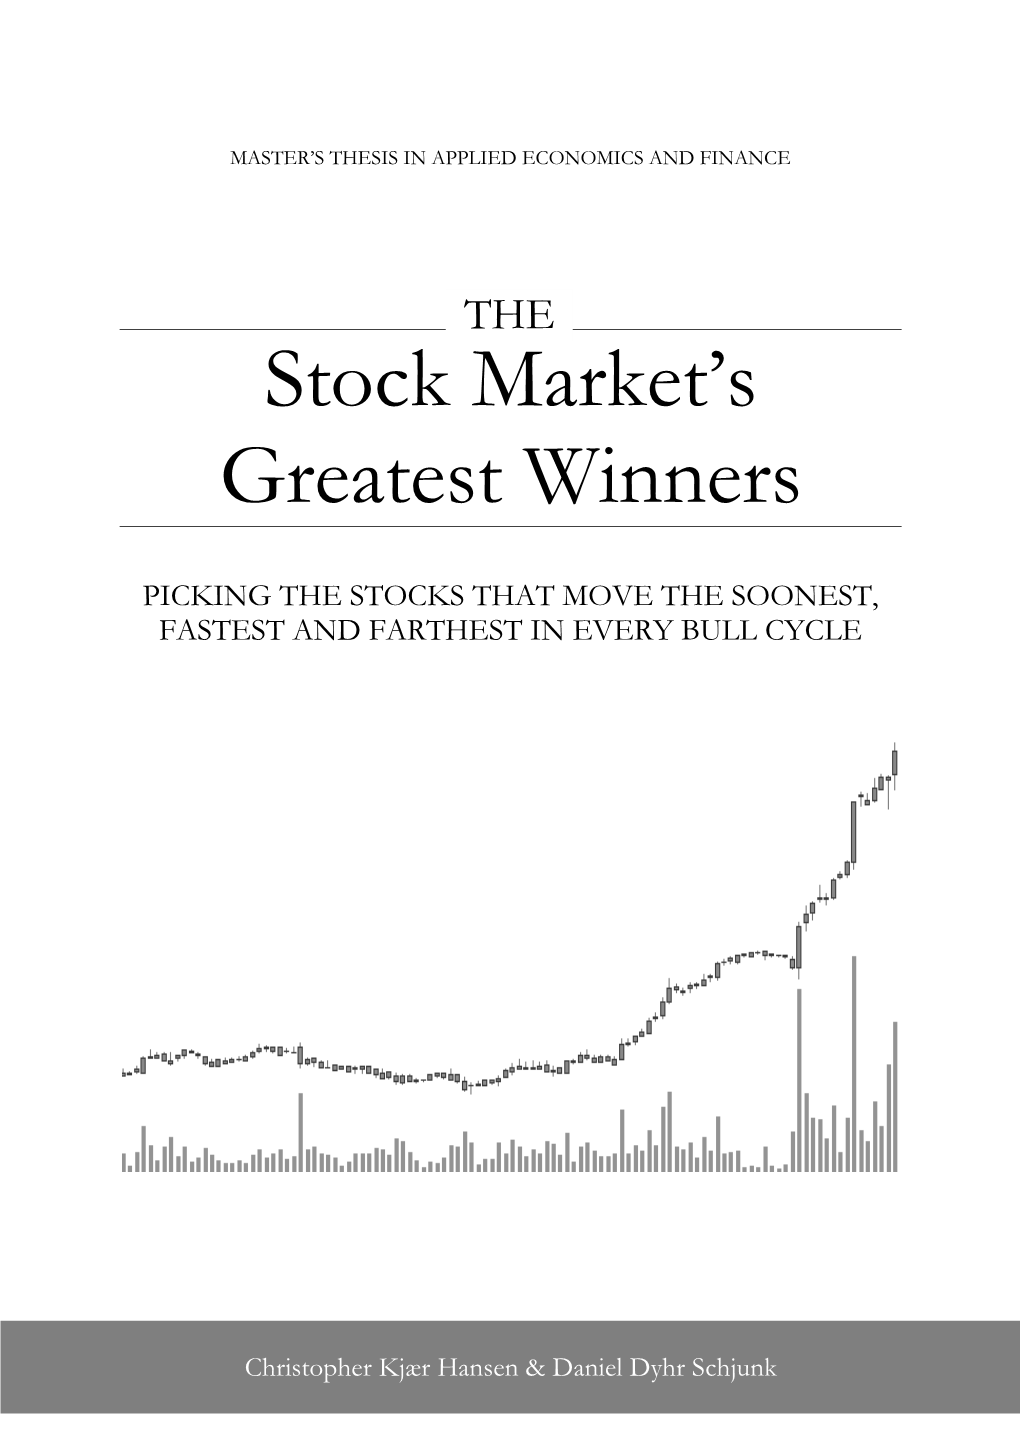 Stock Market Winners in the Nordics Based on Statistics and Case Studies, and Compare with Previous Findings